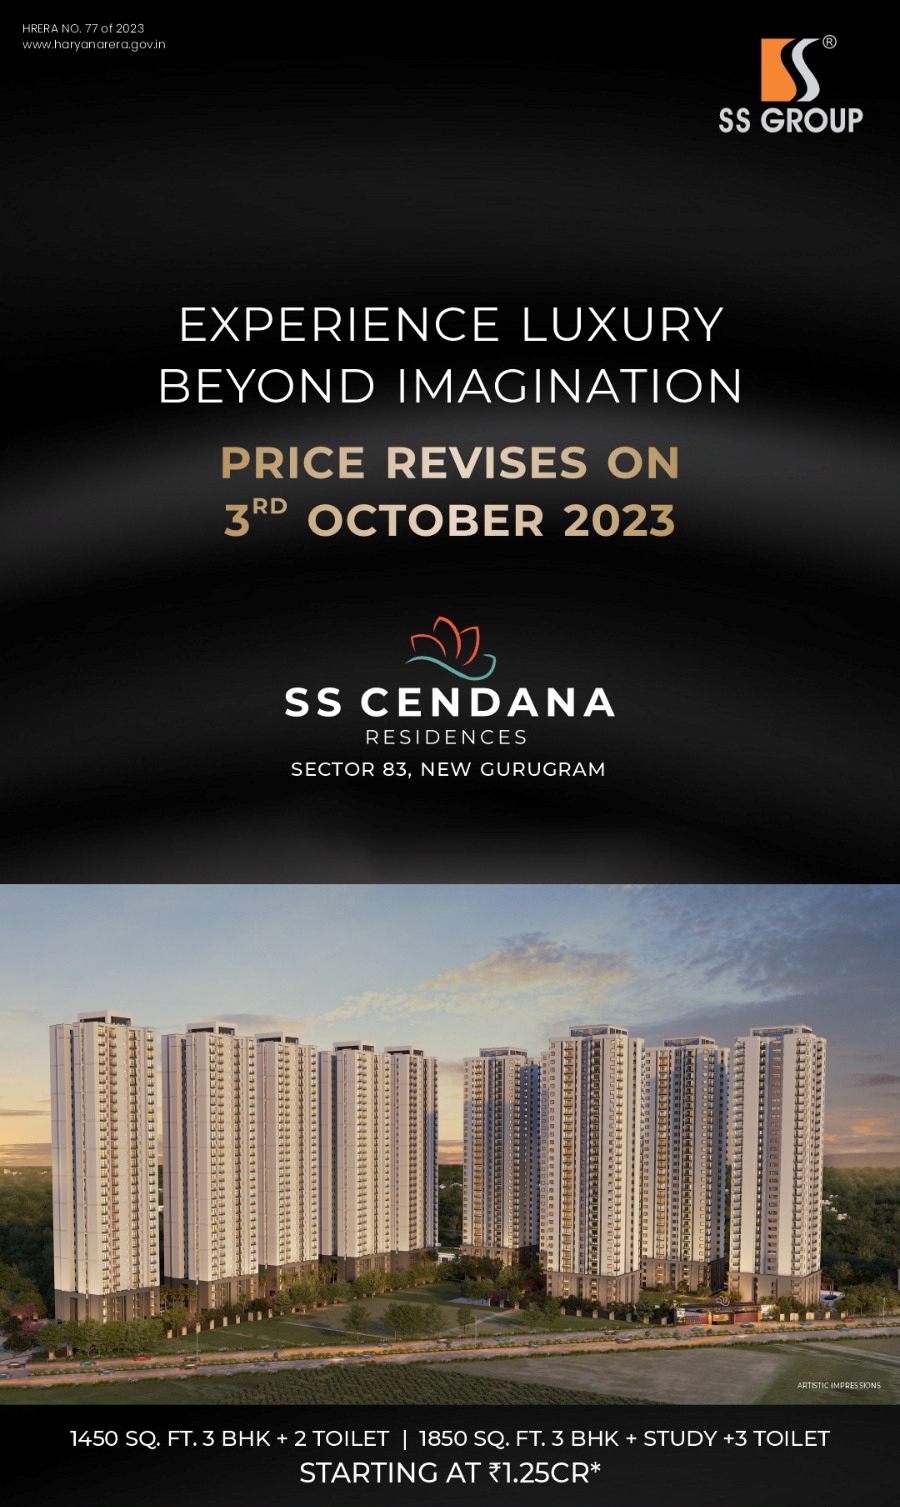 Price revises on 3rd October 2023 at SS Cendana Residence in Sector 83, Gurgaon Update